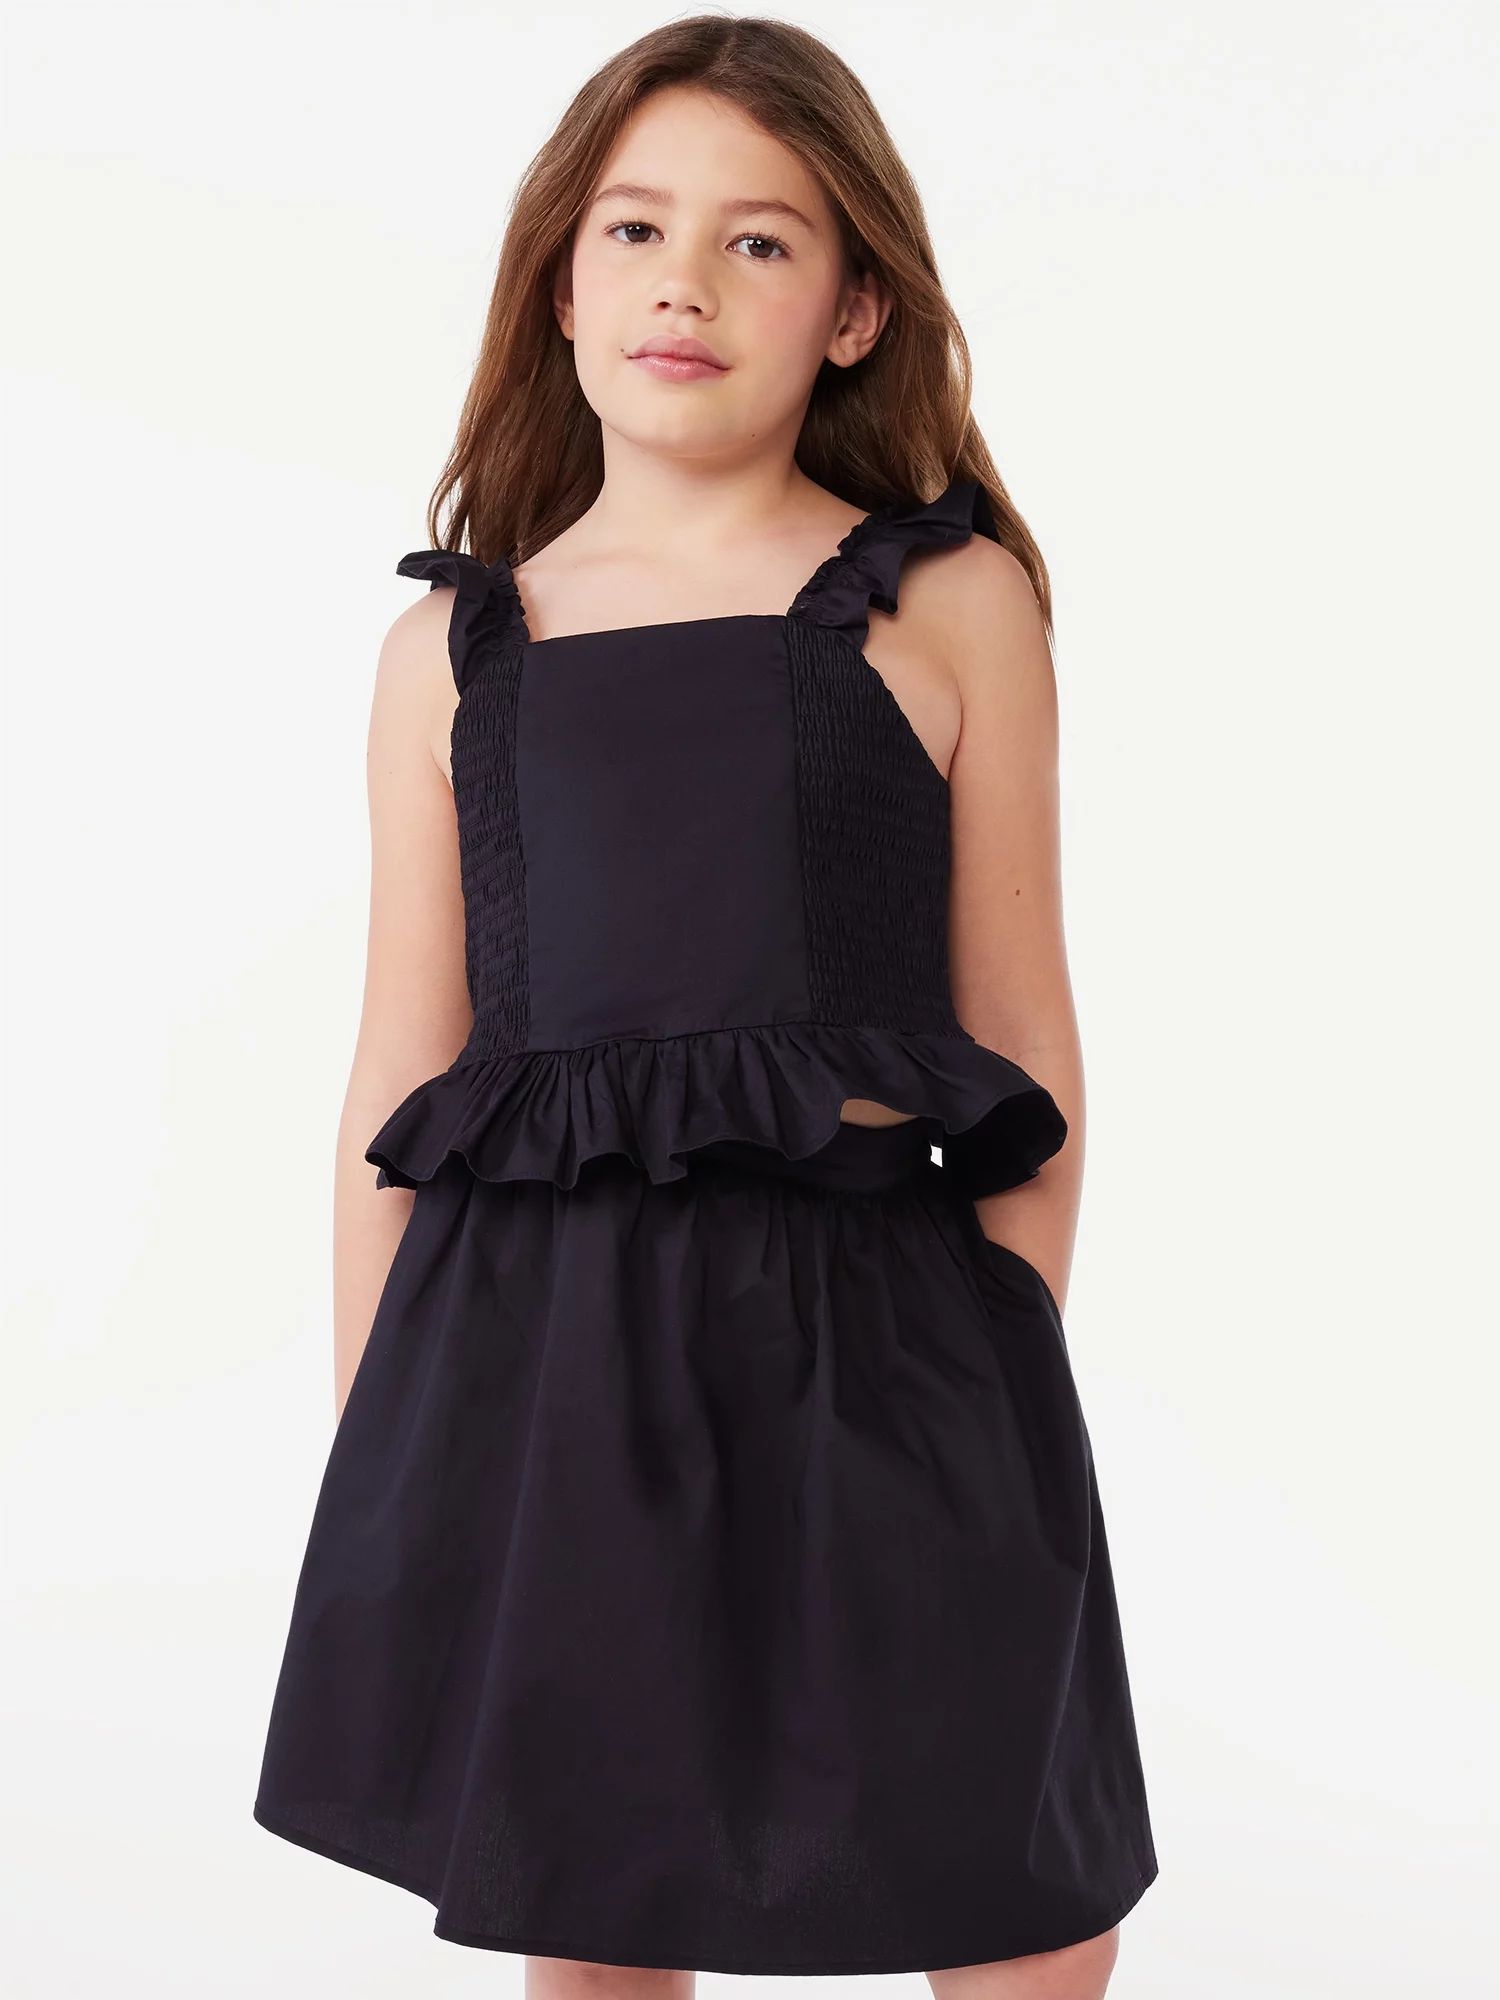 Scoop Girls Flutter Sleeve Top and Pull-On Skirt, 2-Piece Outfit Set, Sizes 4-12 | Walmart (US)